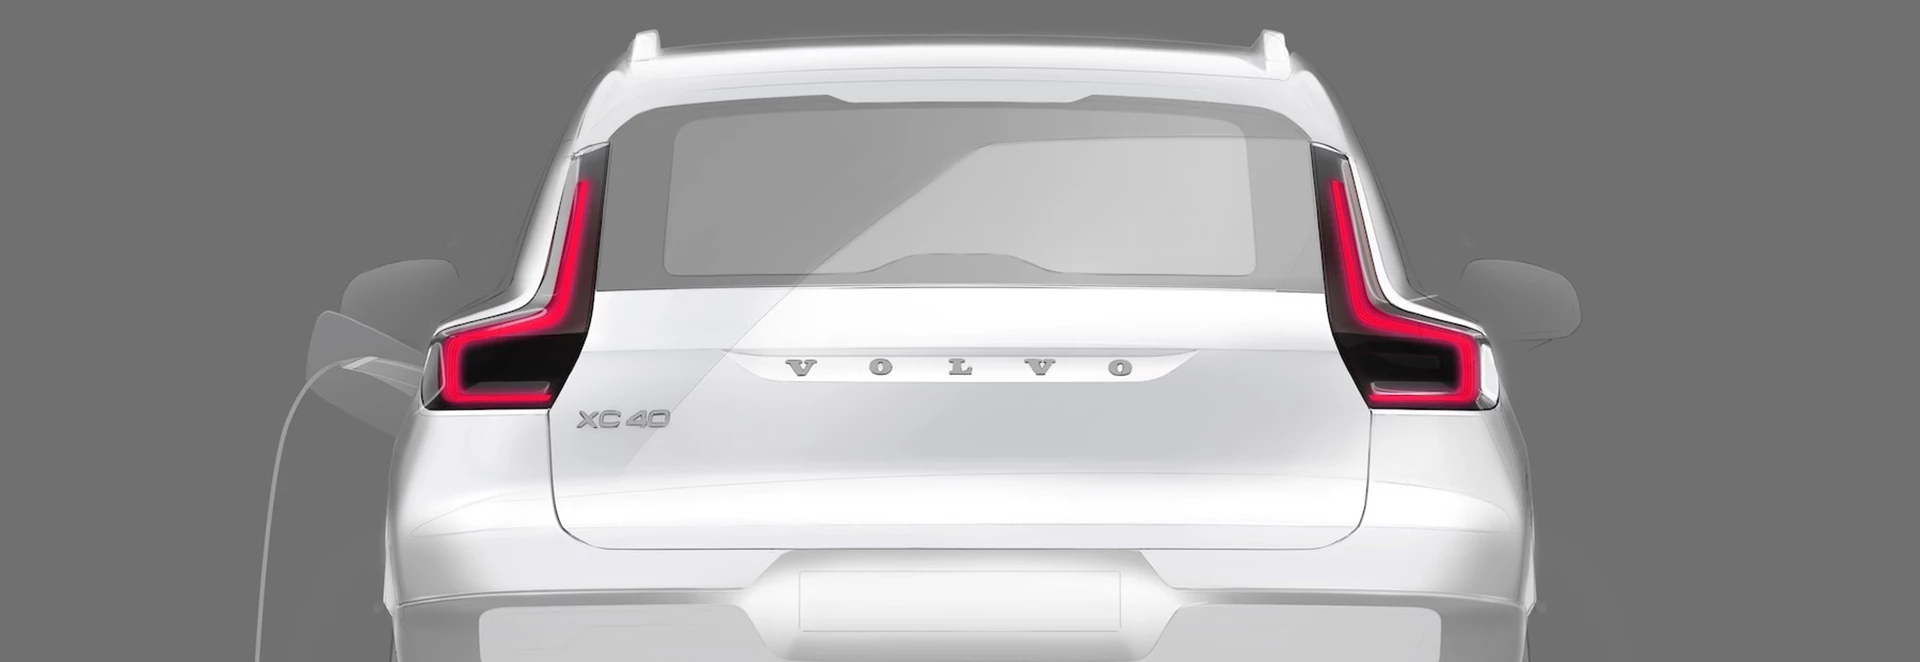 Volvo teases first all-electric model: The XC40 EV 